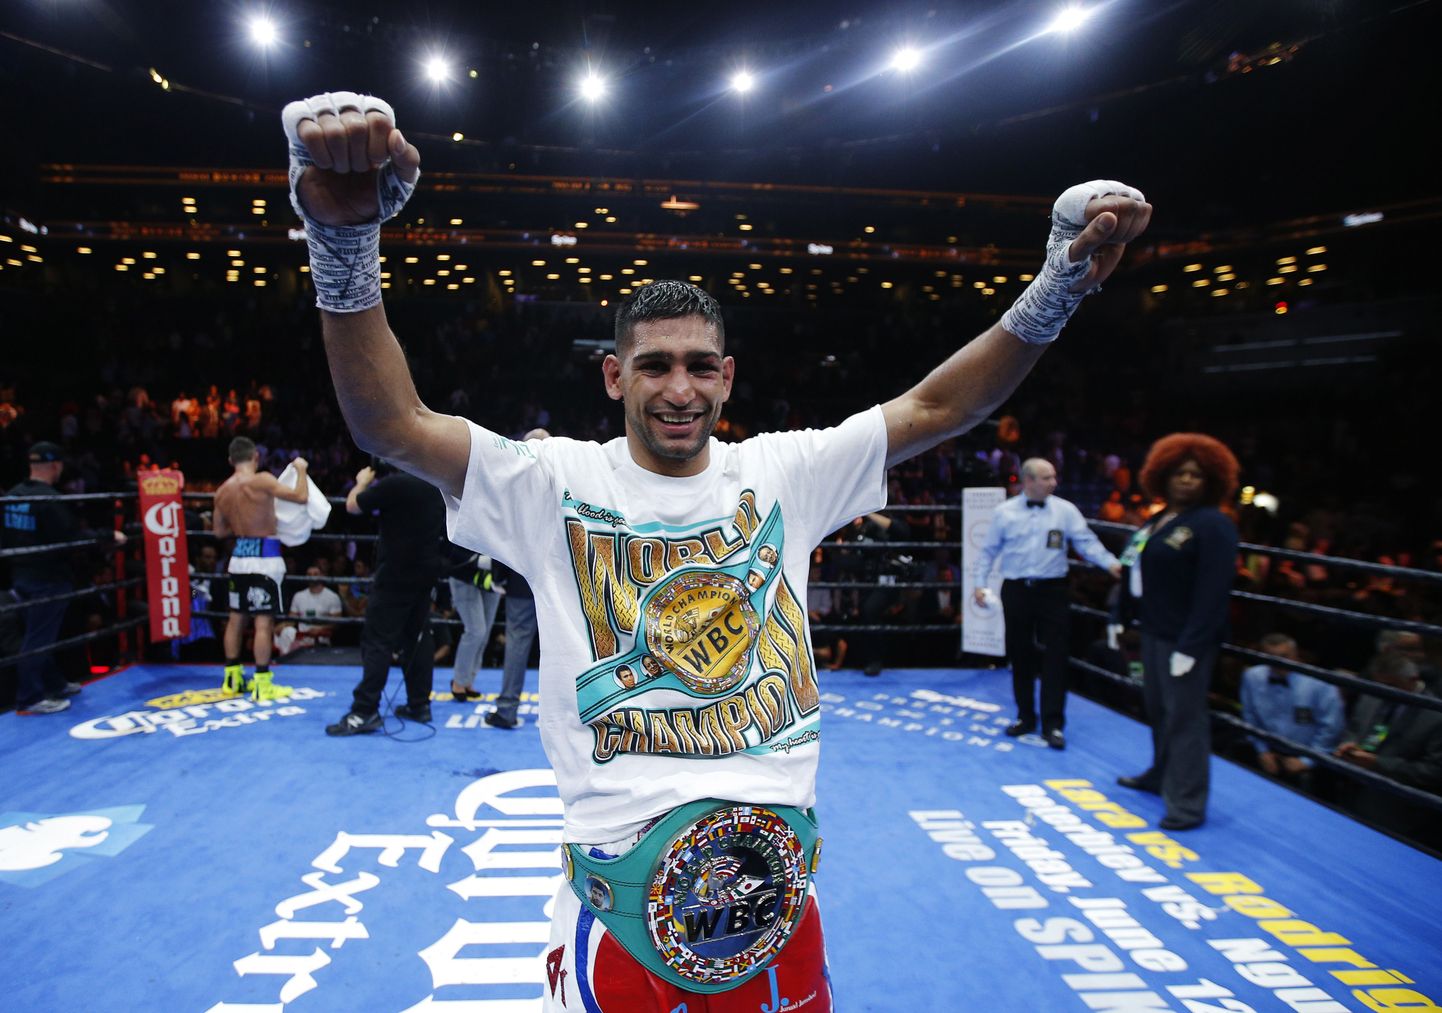 Boxing - Amir Khan v Chris Algieri - Barclays Center, Brooklyn, New York City, United States of America - 29/5/15
Amir Khan celebrates winning the fight
Action Images via Reuters / Andrew Couldridge
Livepic